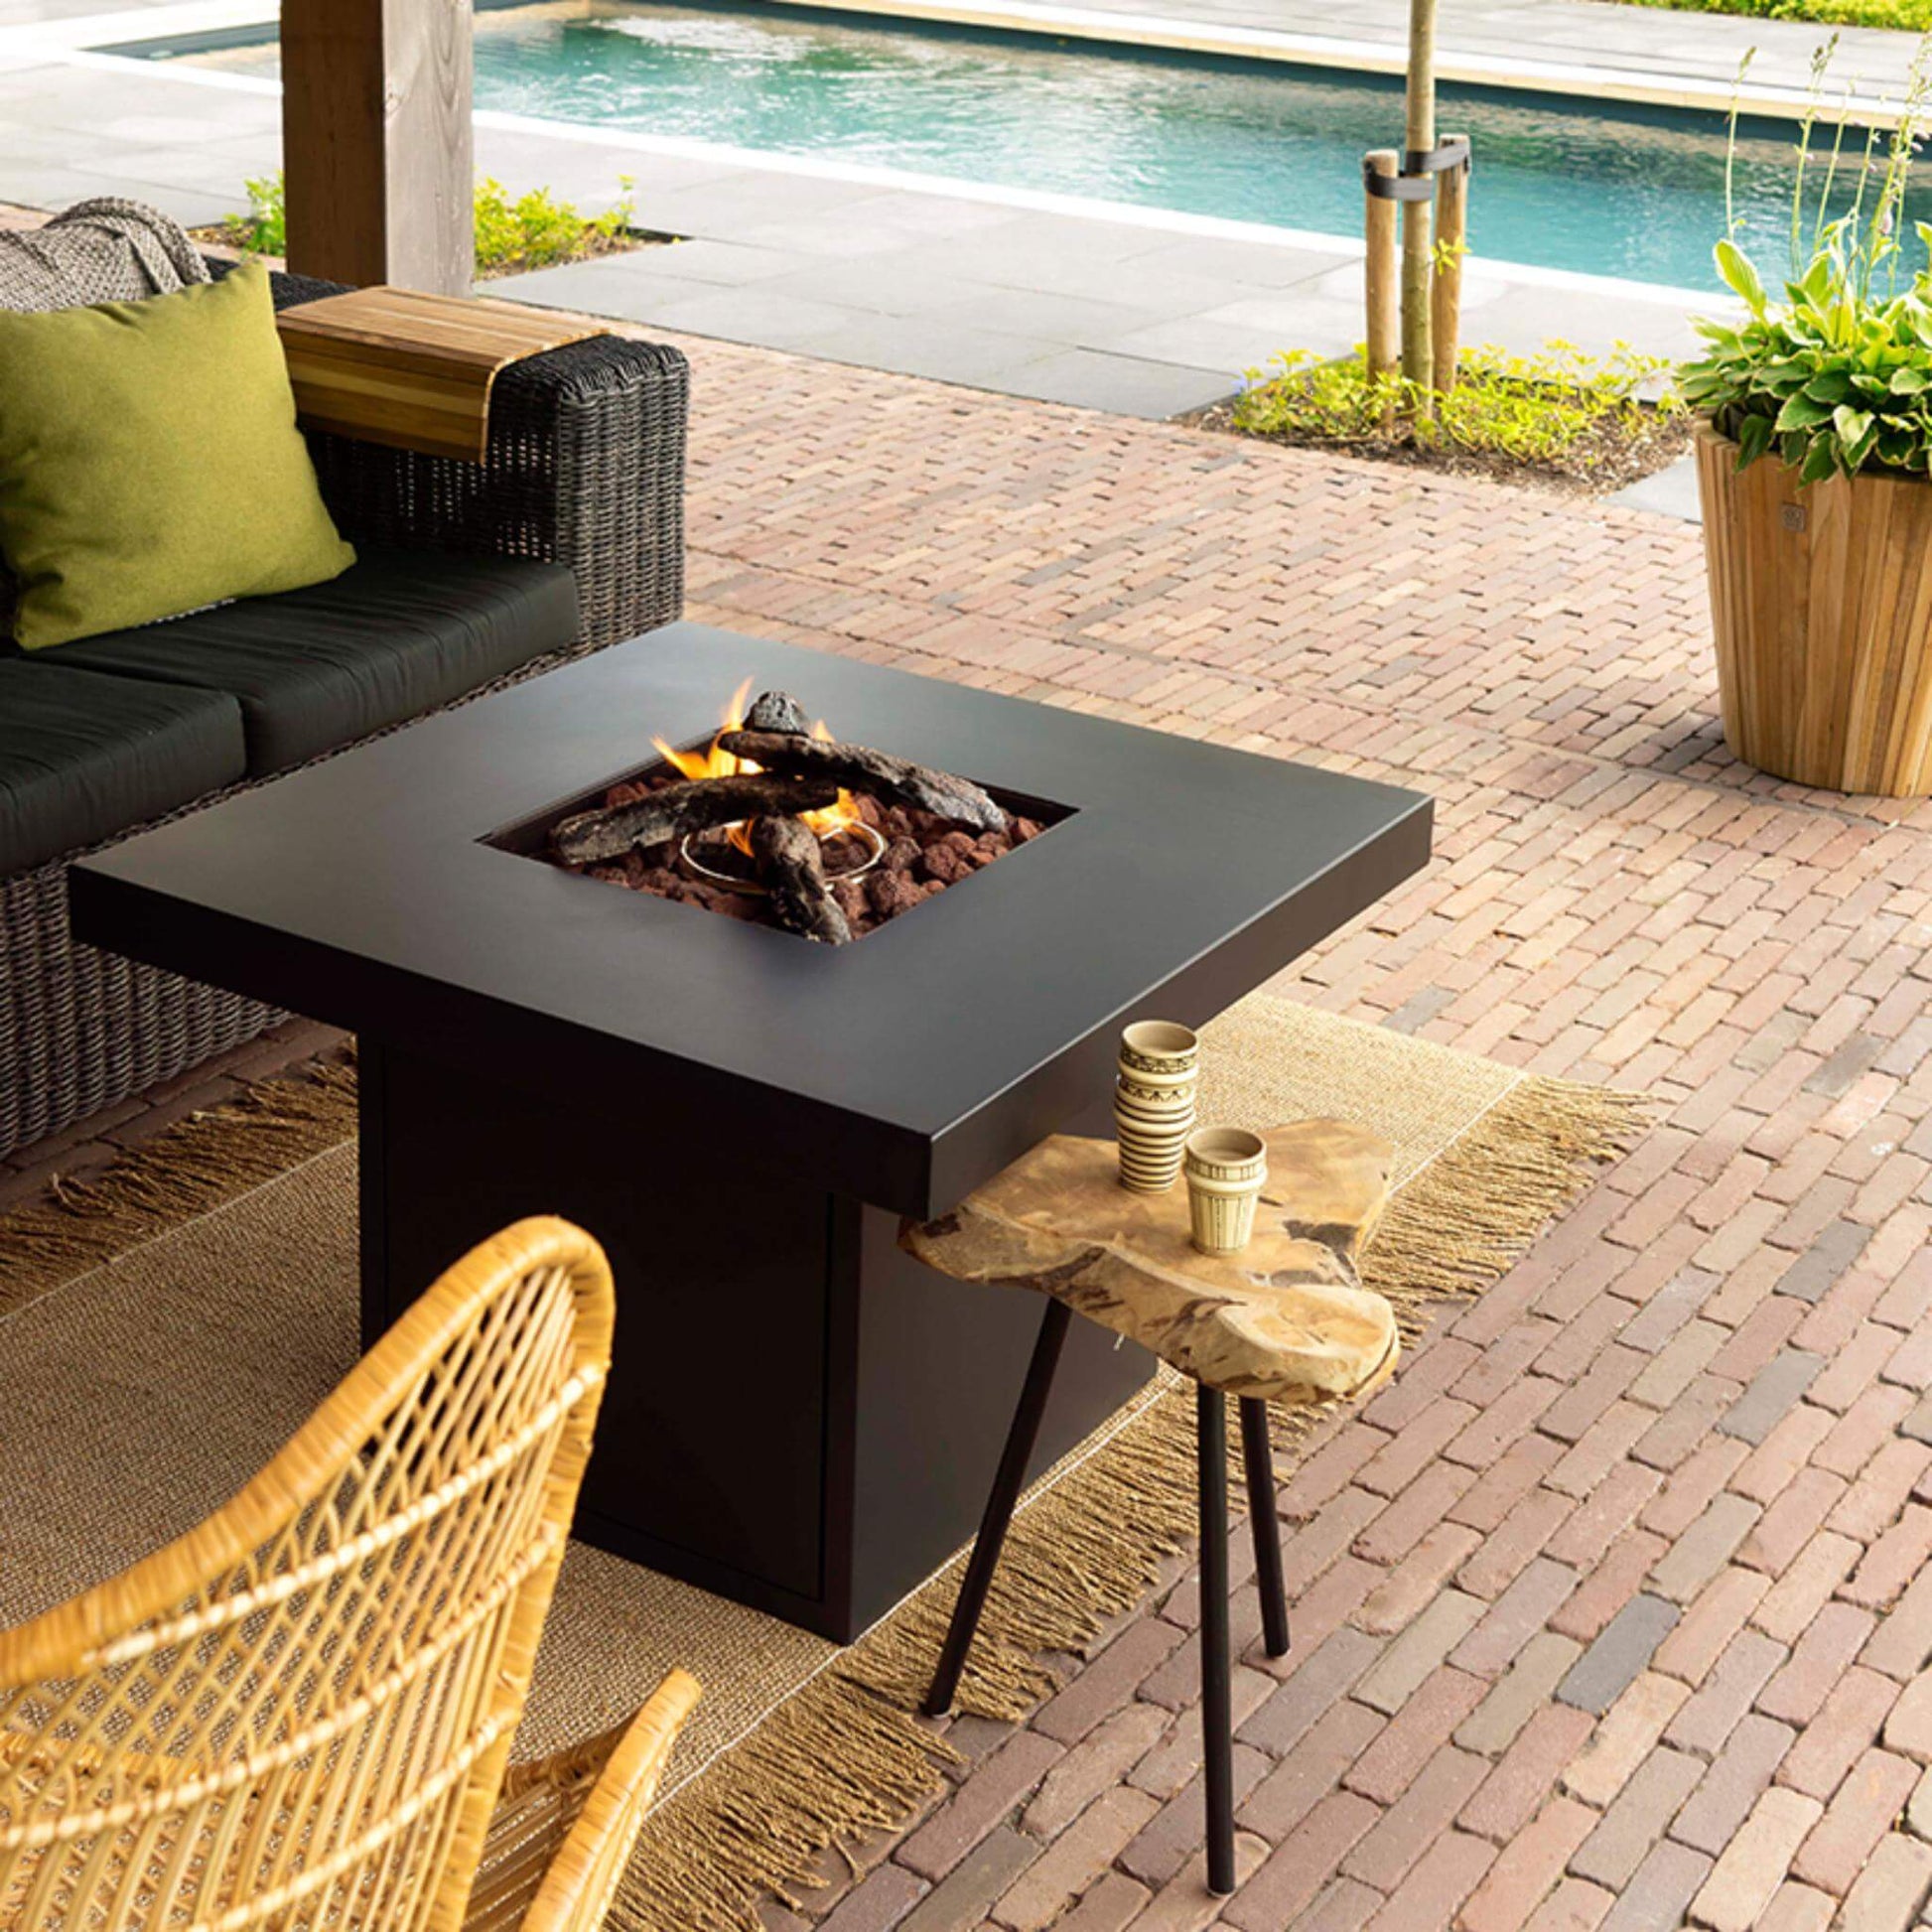 Cosibrixx 90 Anthracite Gas Fire Pit Table with lit fire in outdoor garden setting